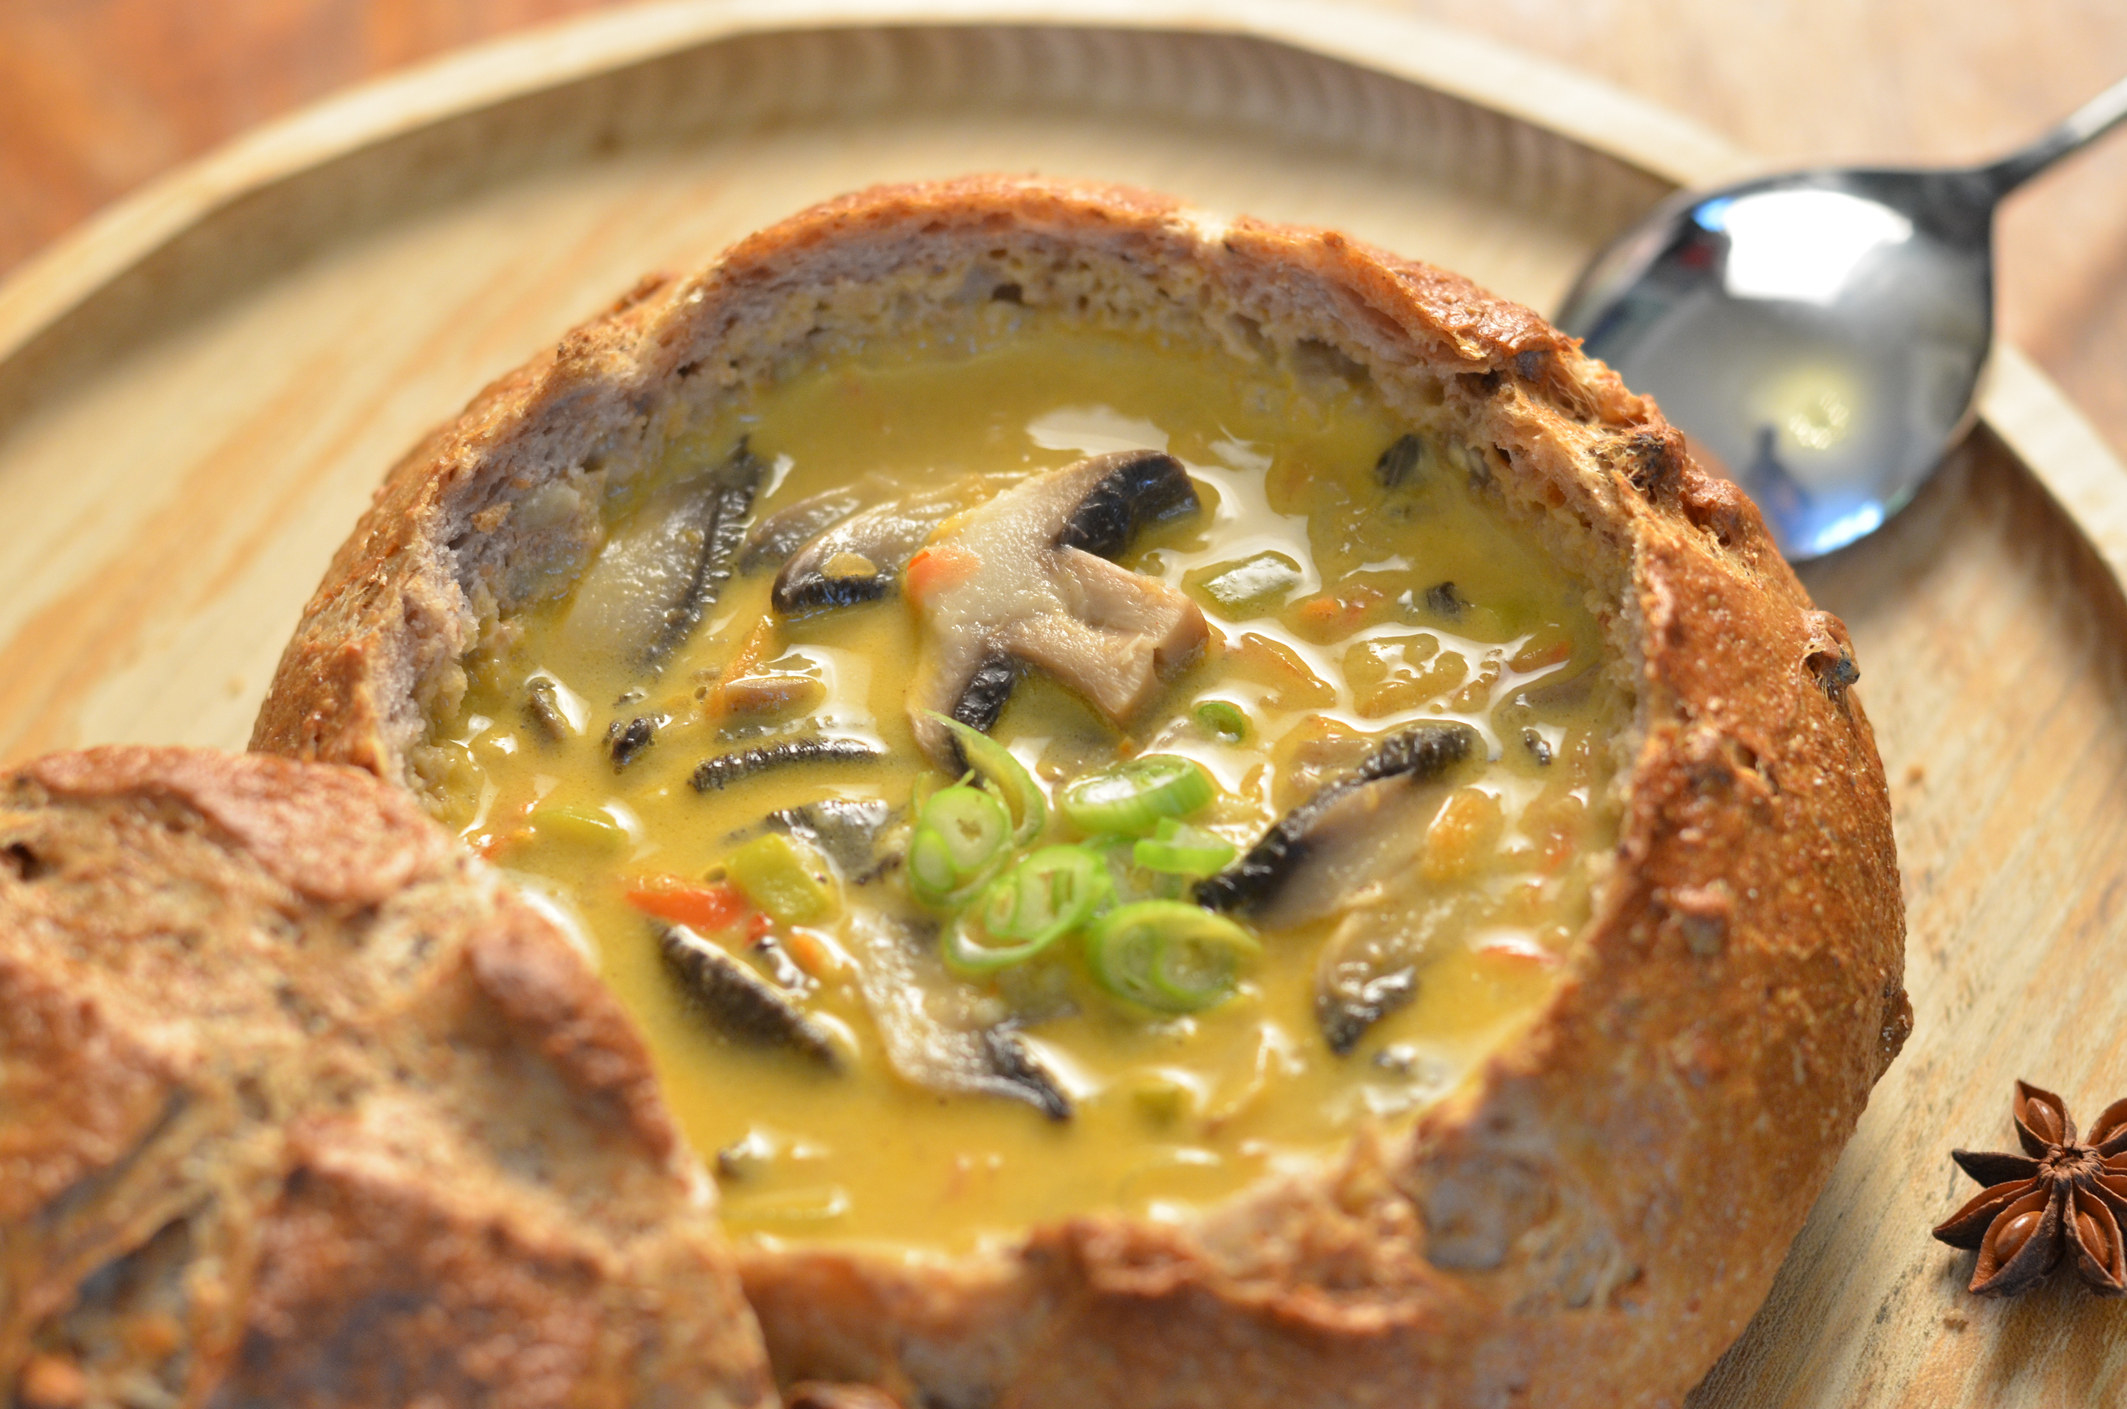 Mushroom soup served in a bowl